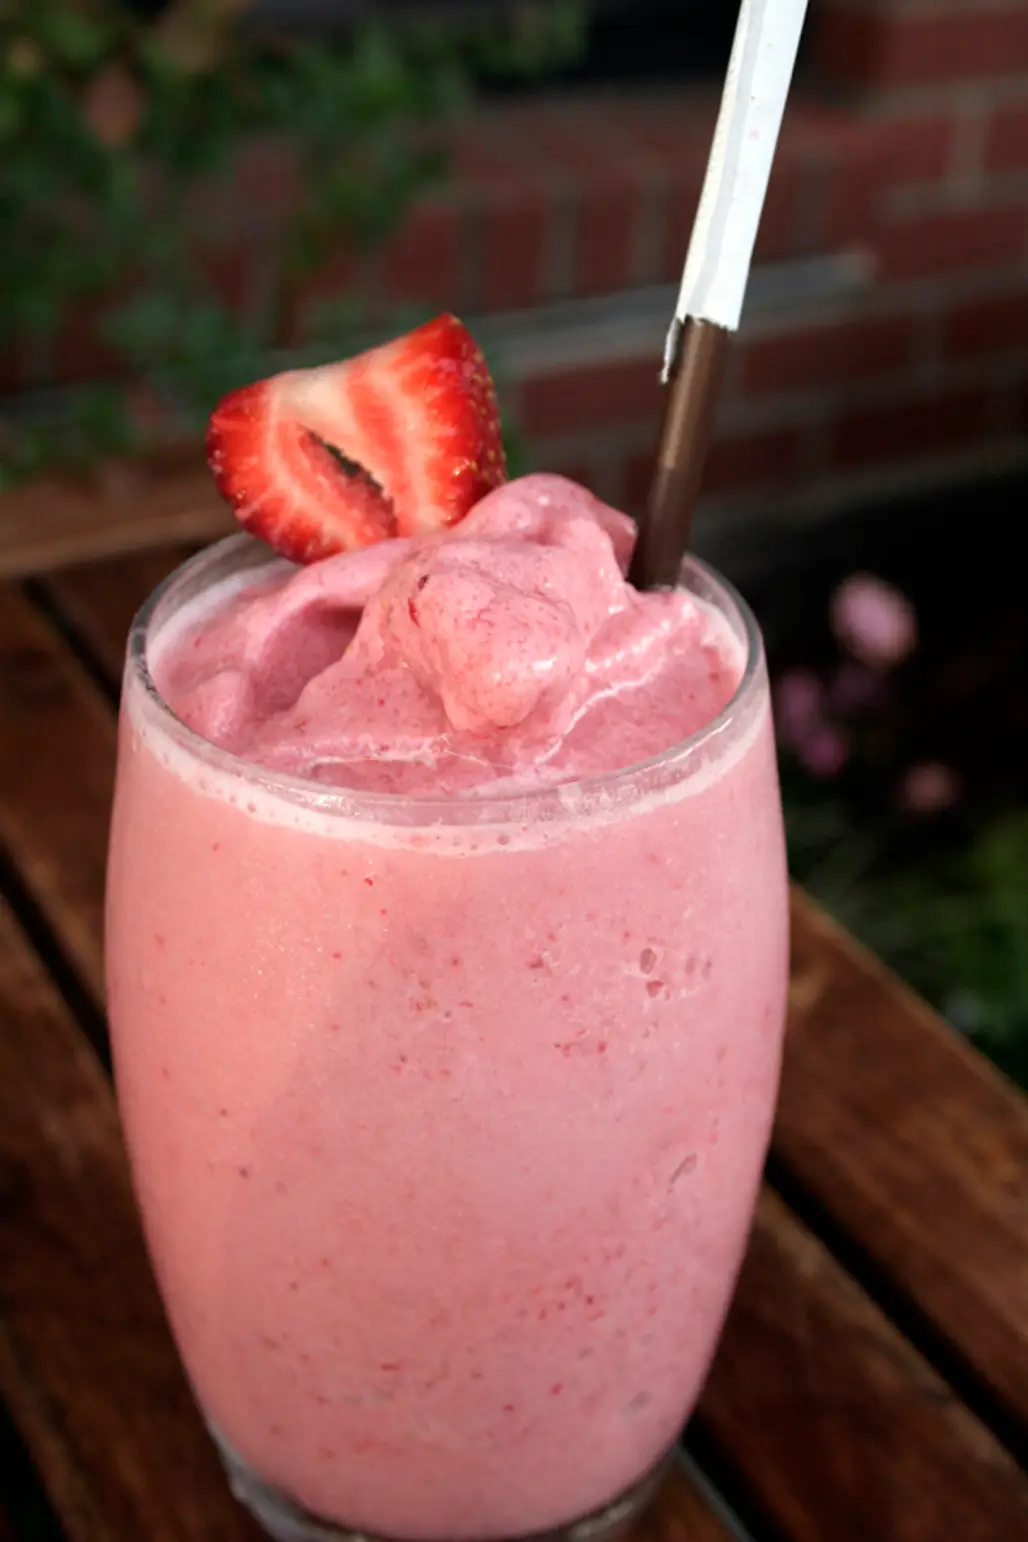 Strawberry Almond Butter Smoothie